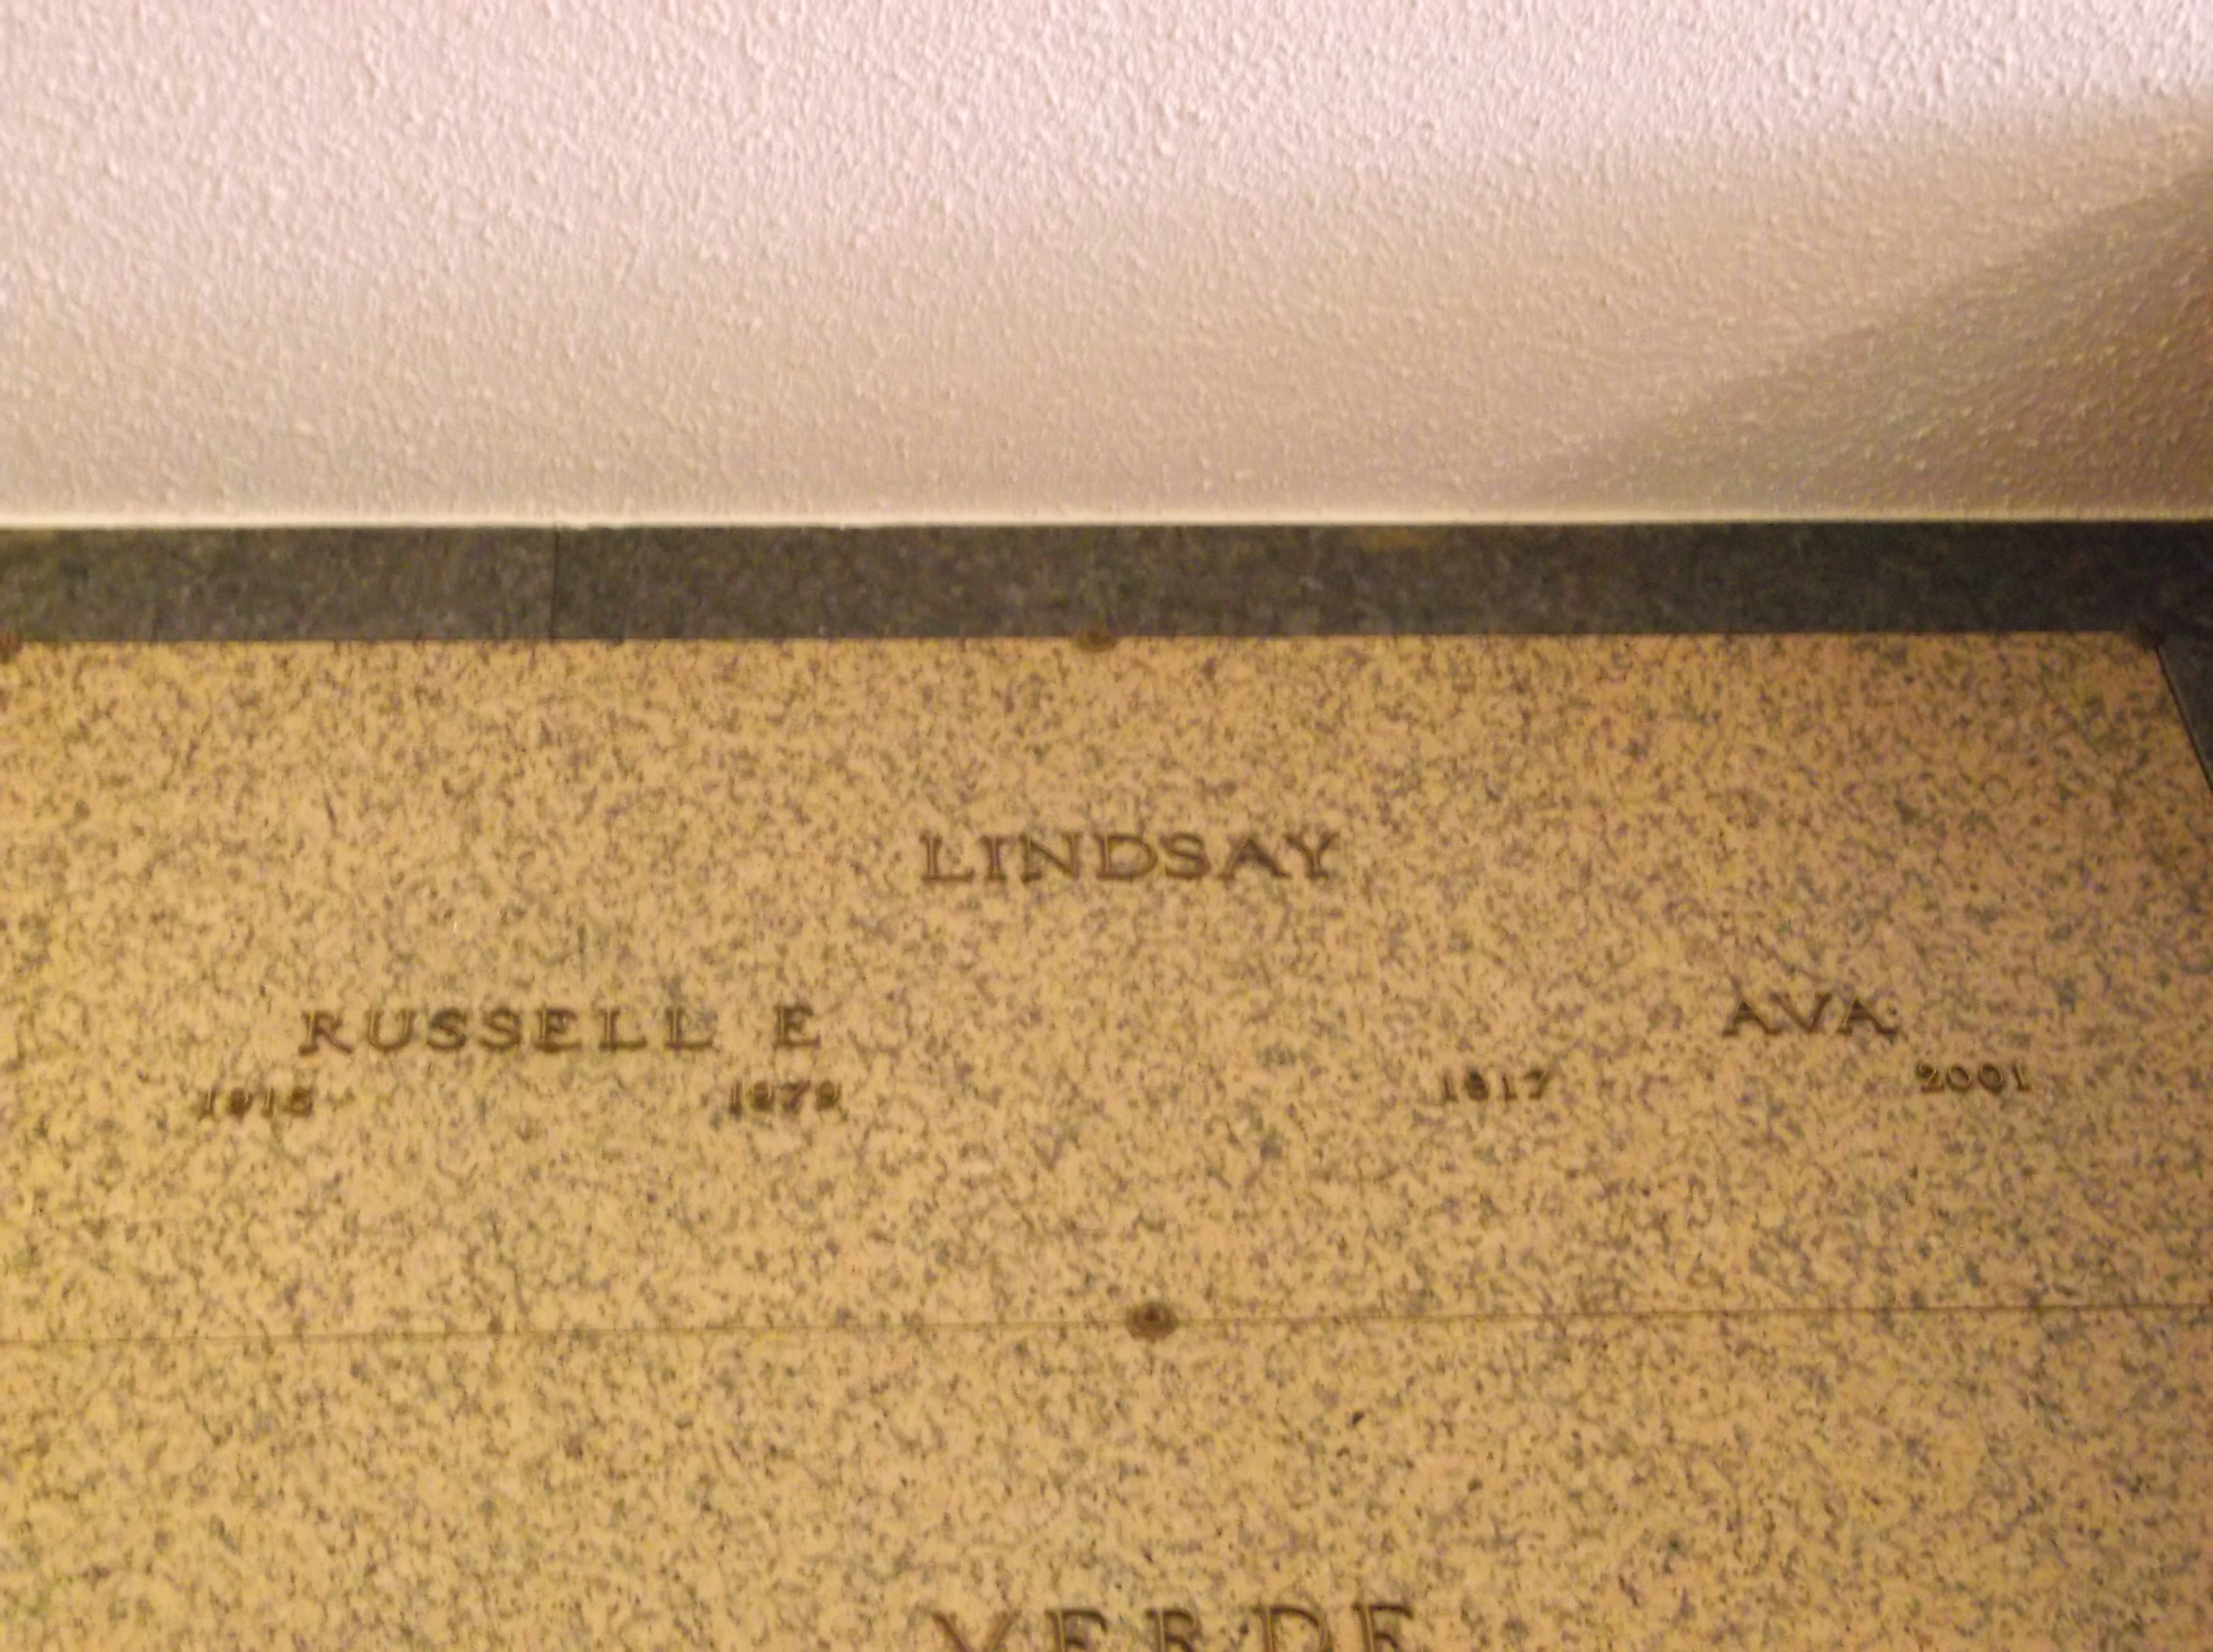 Russell E Lindsay